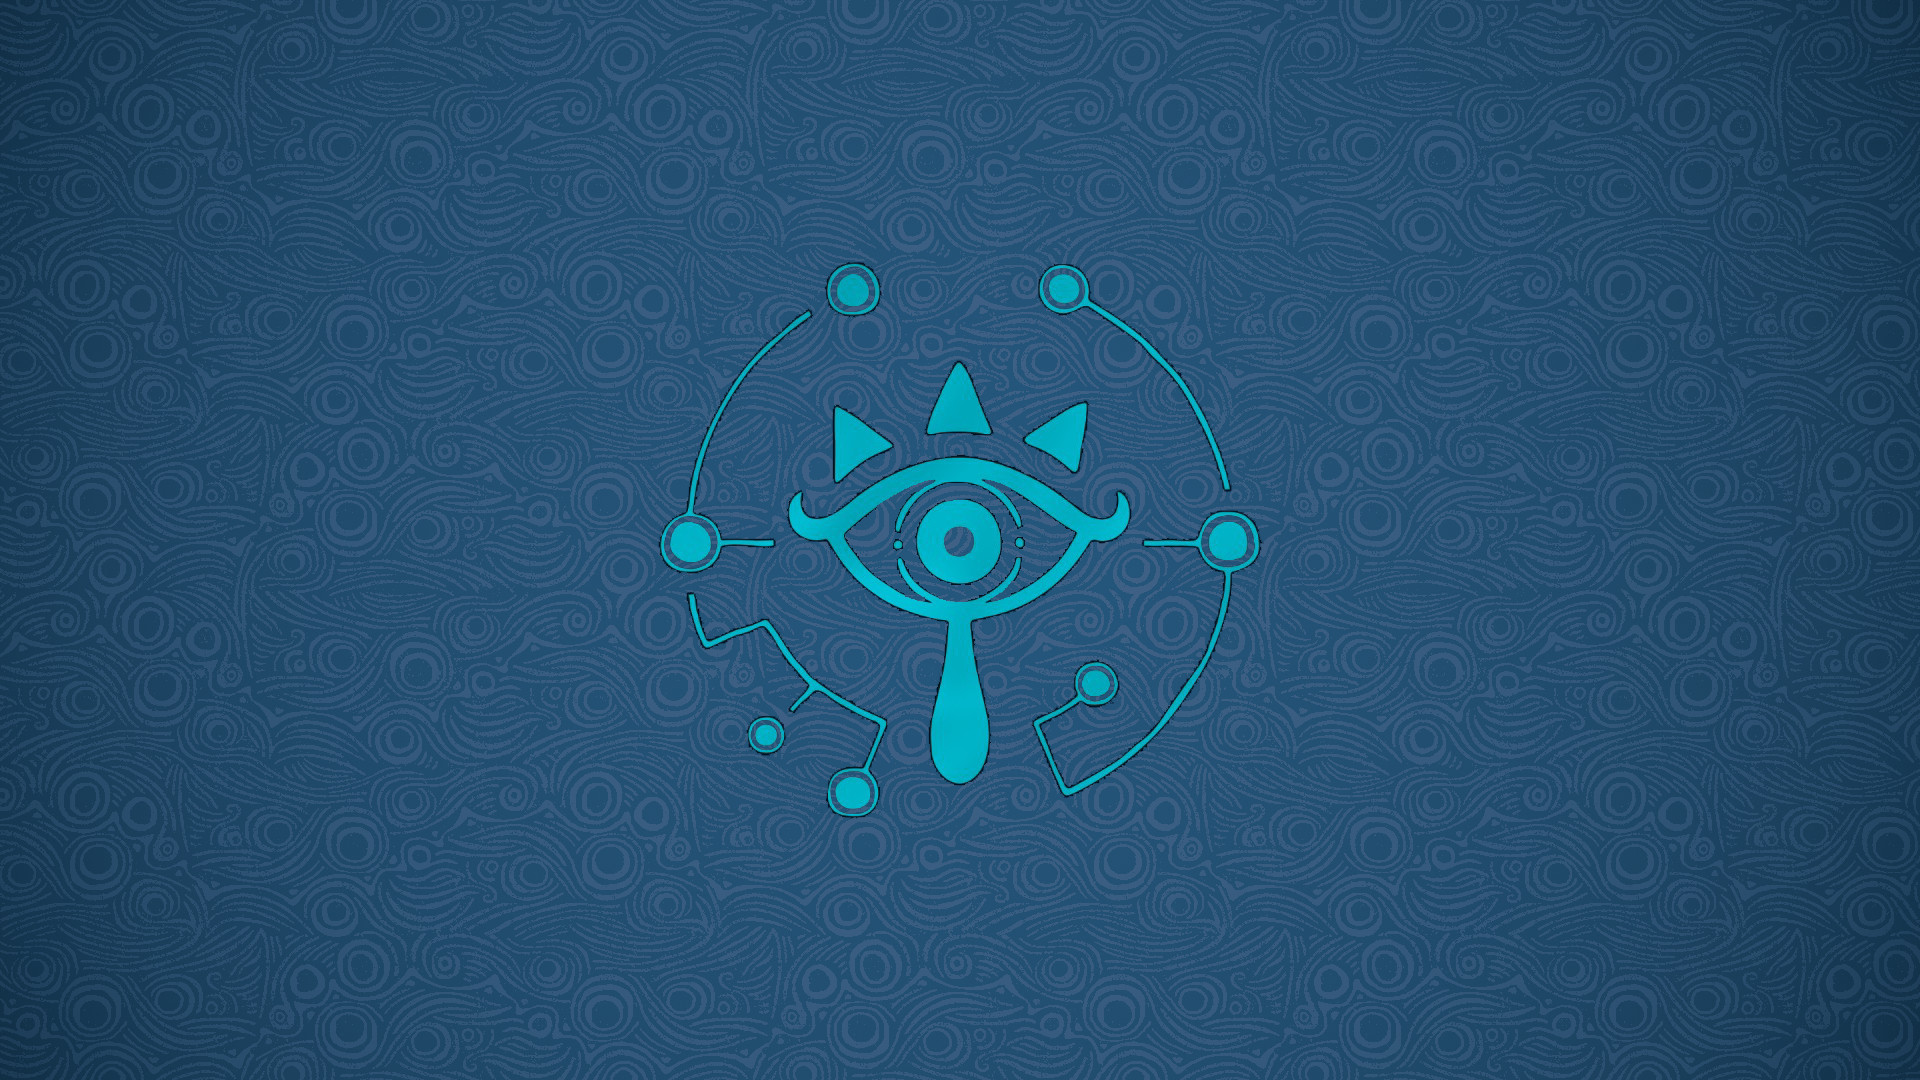 ArtREQUEST Can someone make a wallpaper with the Sheikah Symbol and the Swirl Background, sort of like this